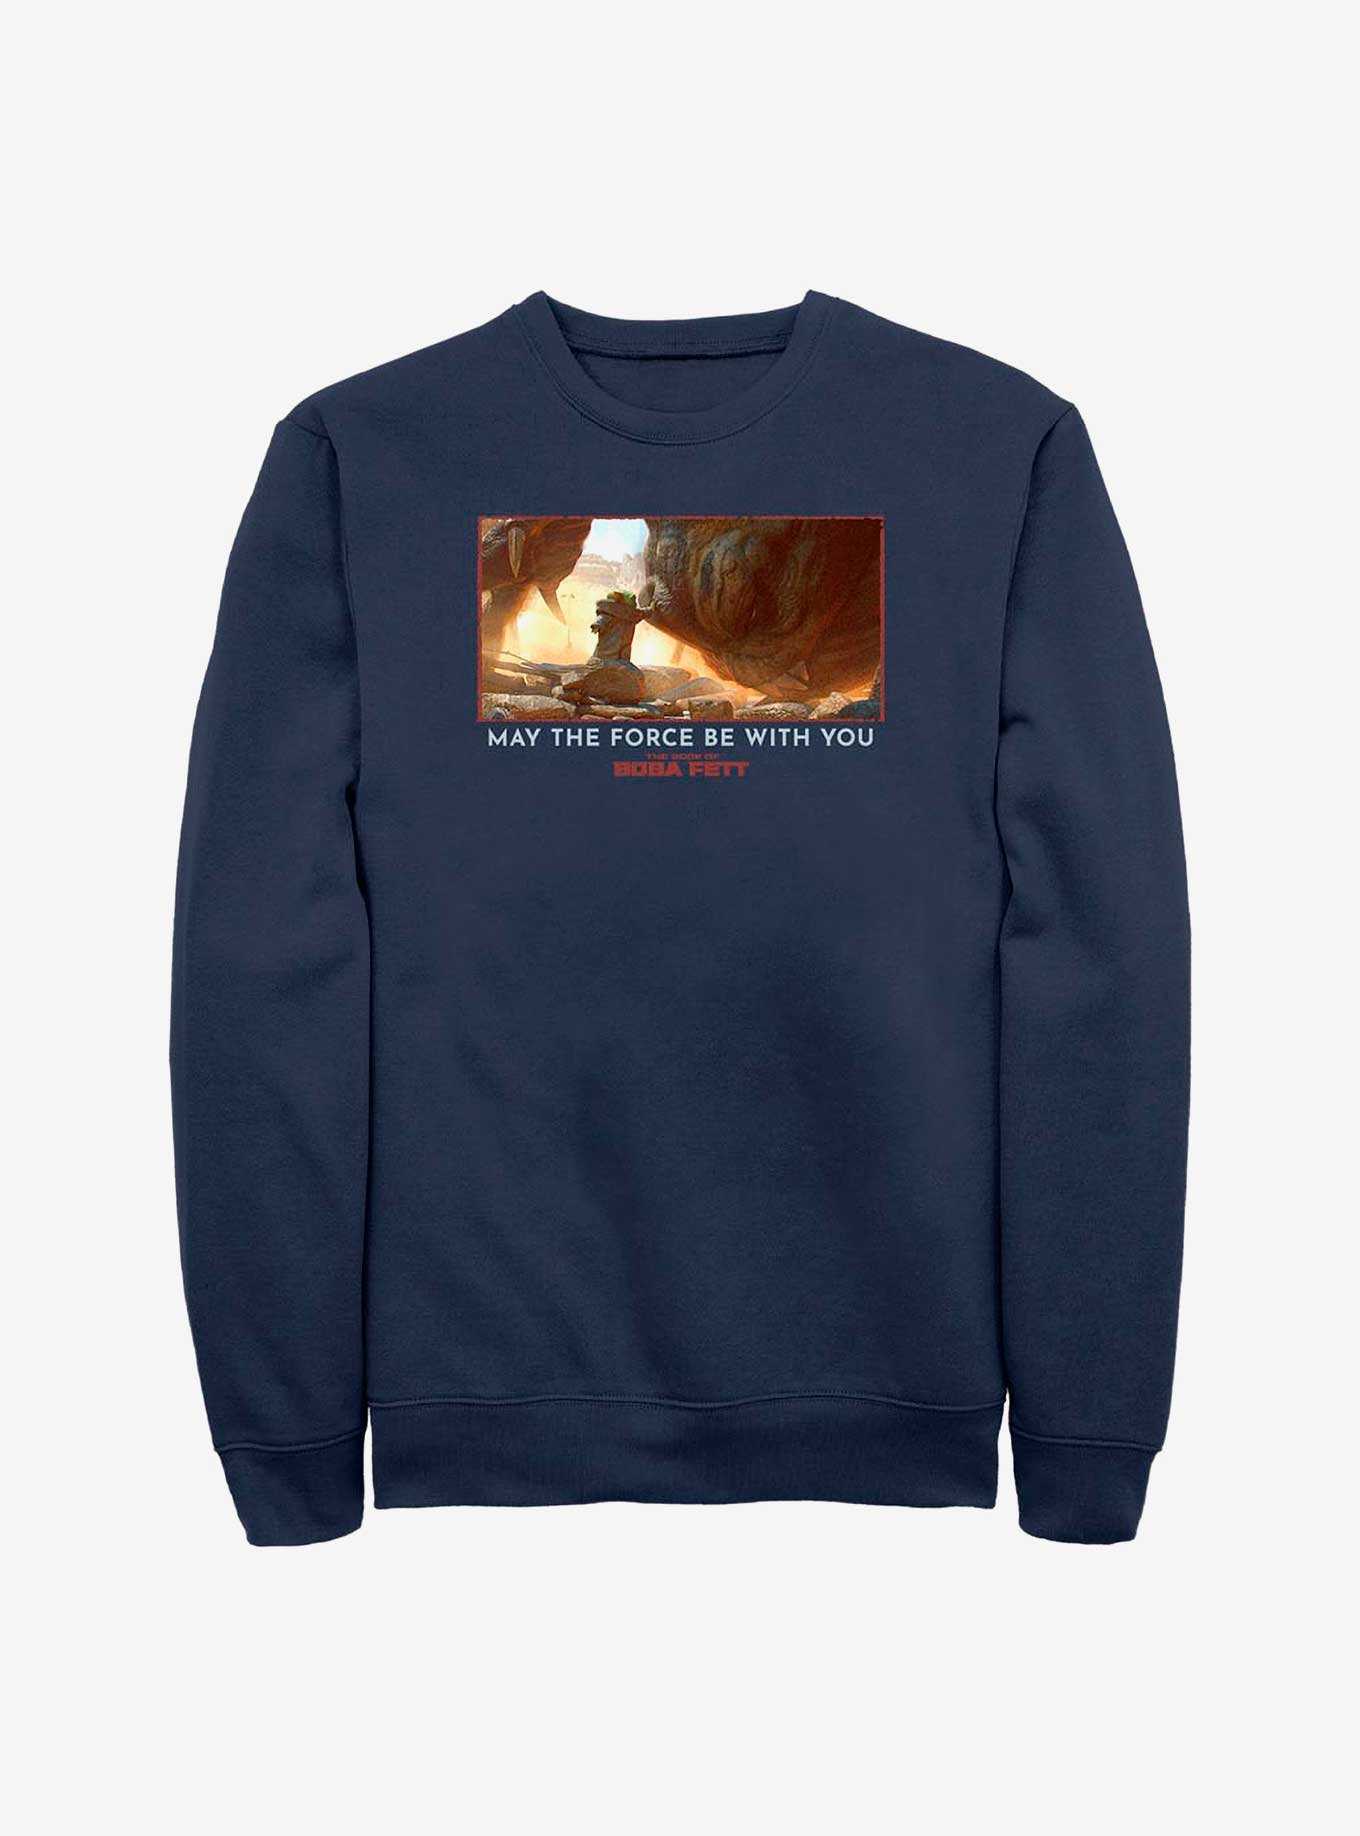 Star Wars The Book Of Boba Fett The Child Never Give Up Sweatshirt, , hi-res